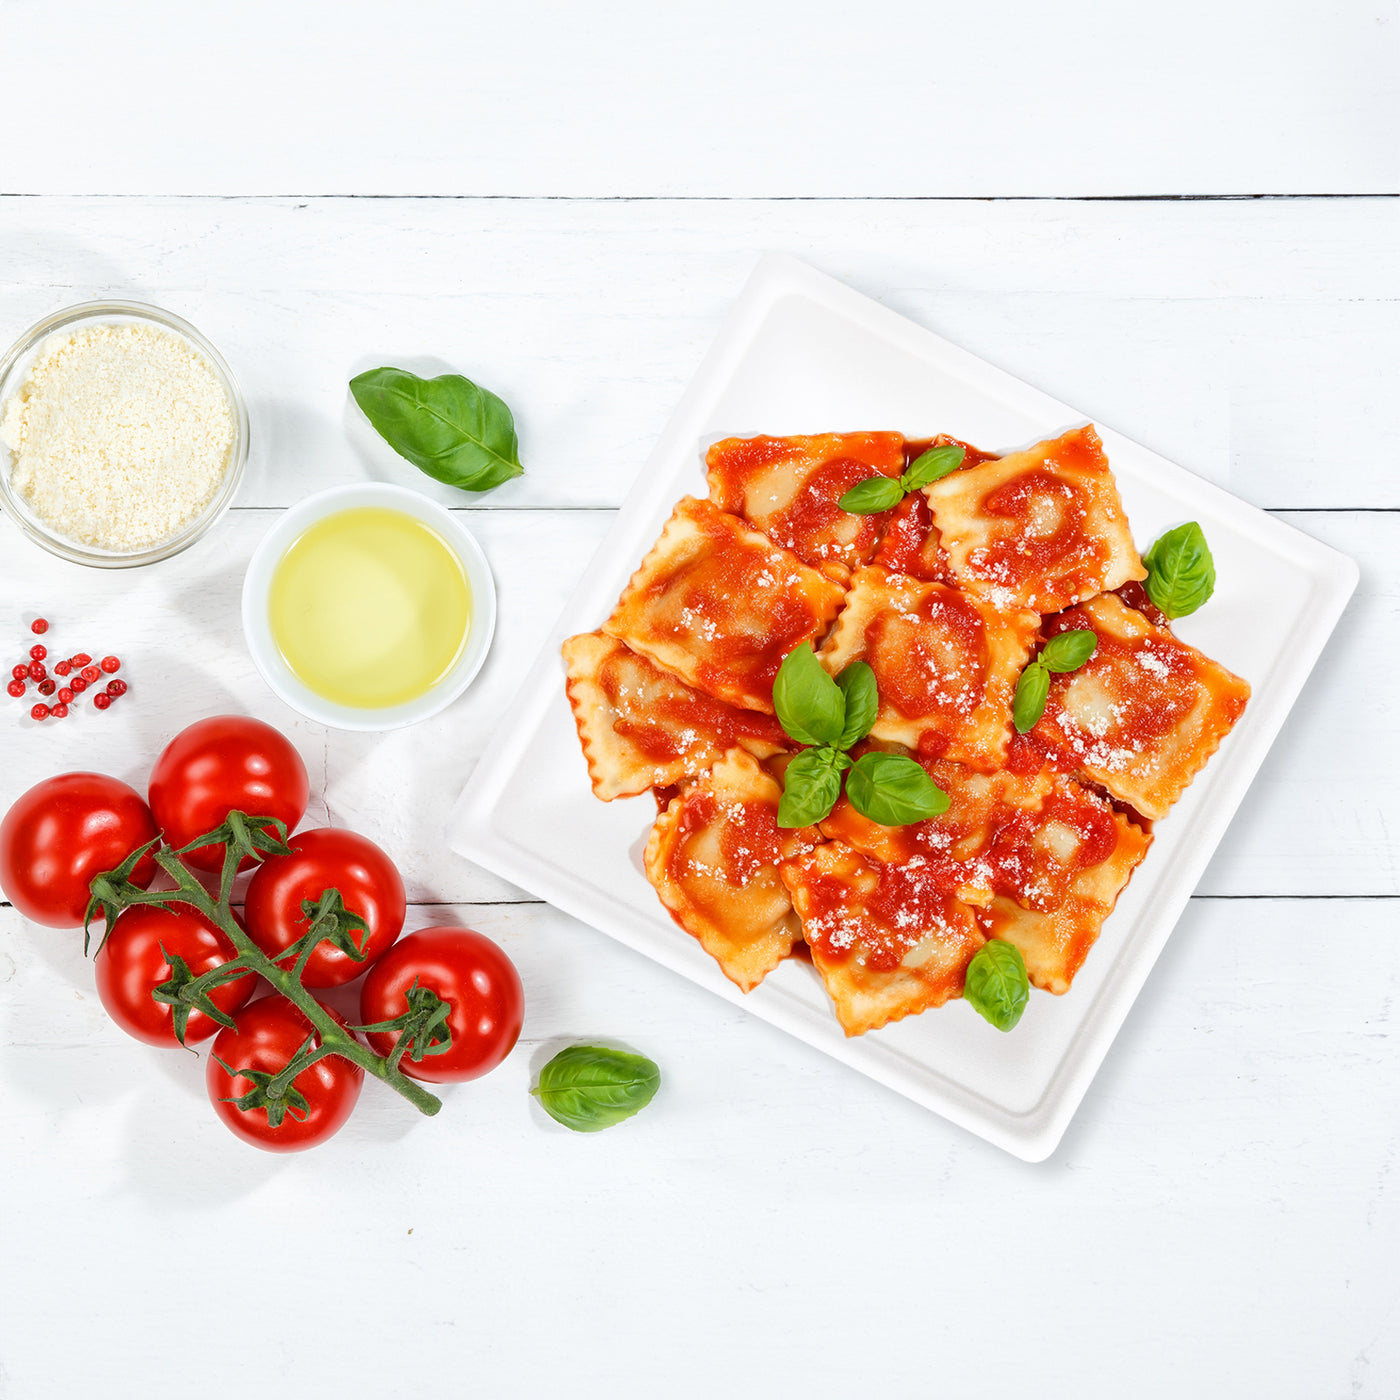 A plate of ravioli topped with tomato sauce and fresh basil leaves on a 10-inch square pearl white compostable plate.